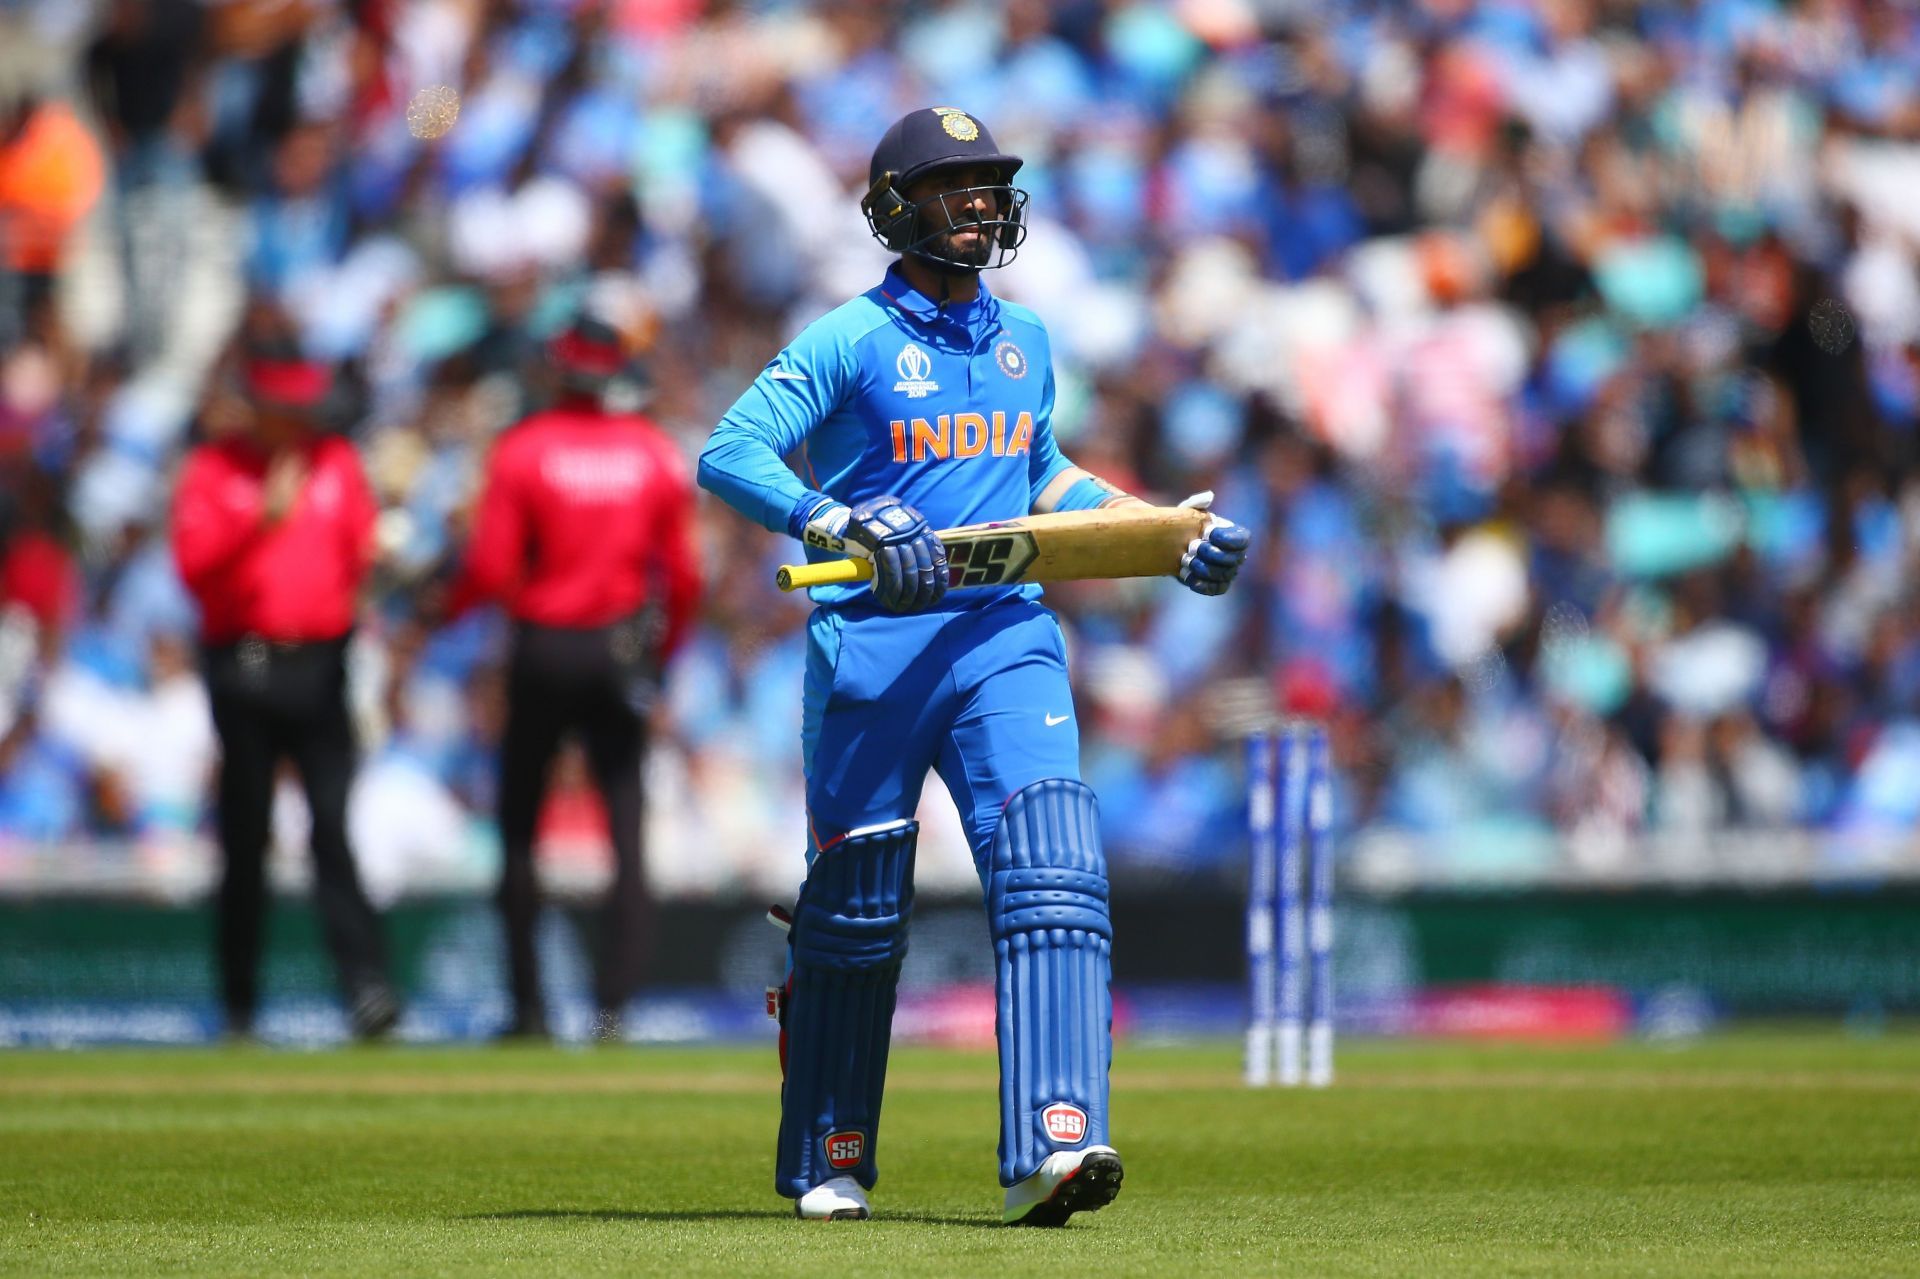 Dinesh Karthik last represented India in the 2019 World Cup. Pic: Getty Images